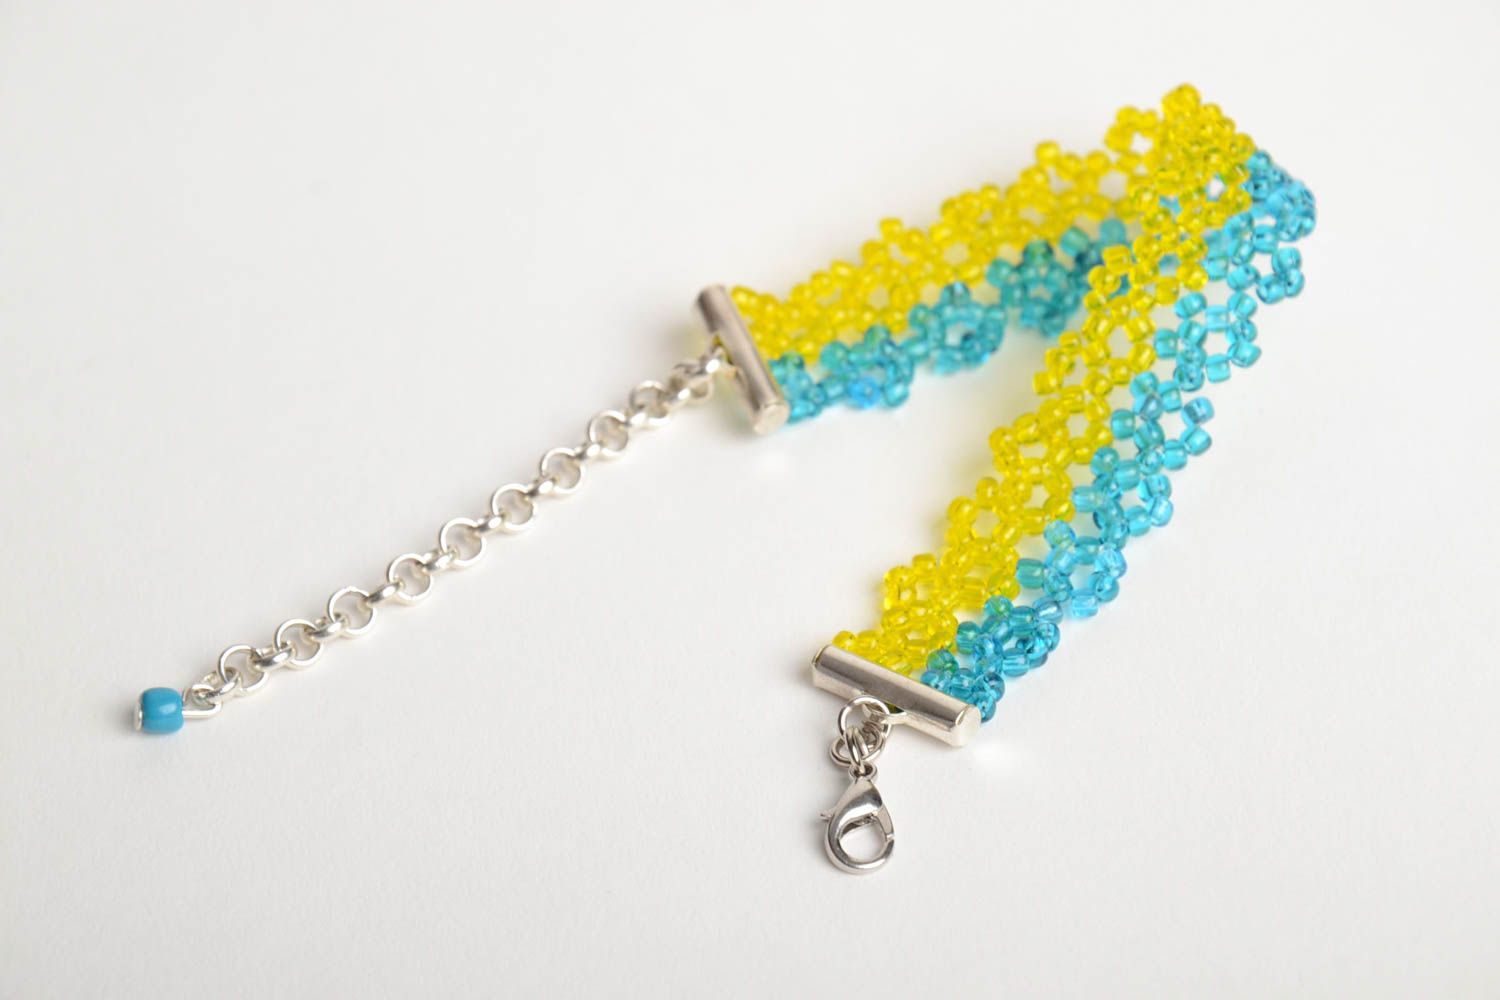 Handmade wrist bracelet crocheted of yellow and blue beads with metal chain photo 4